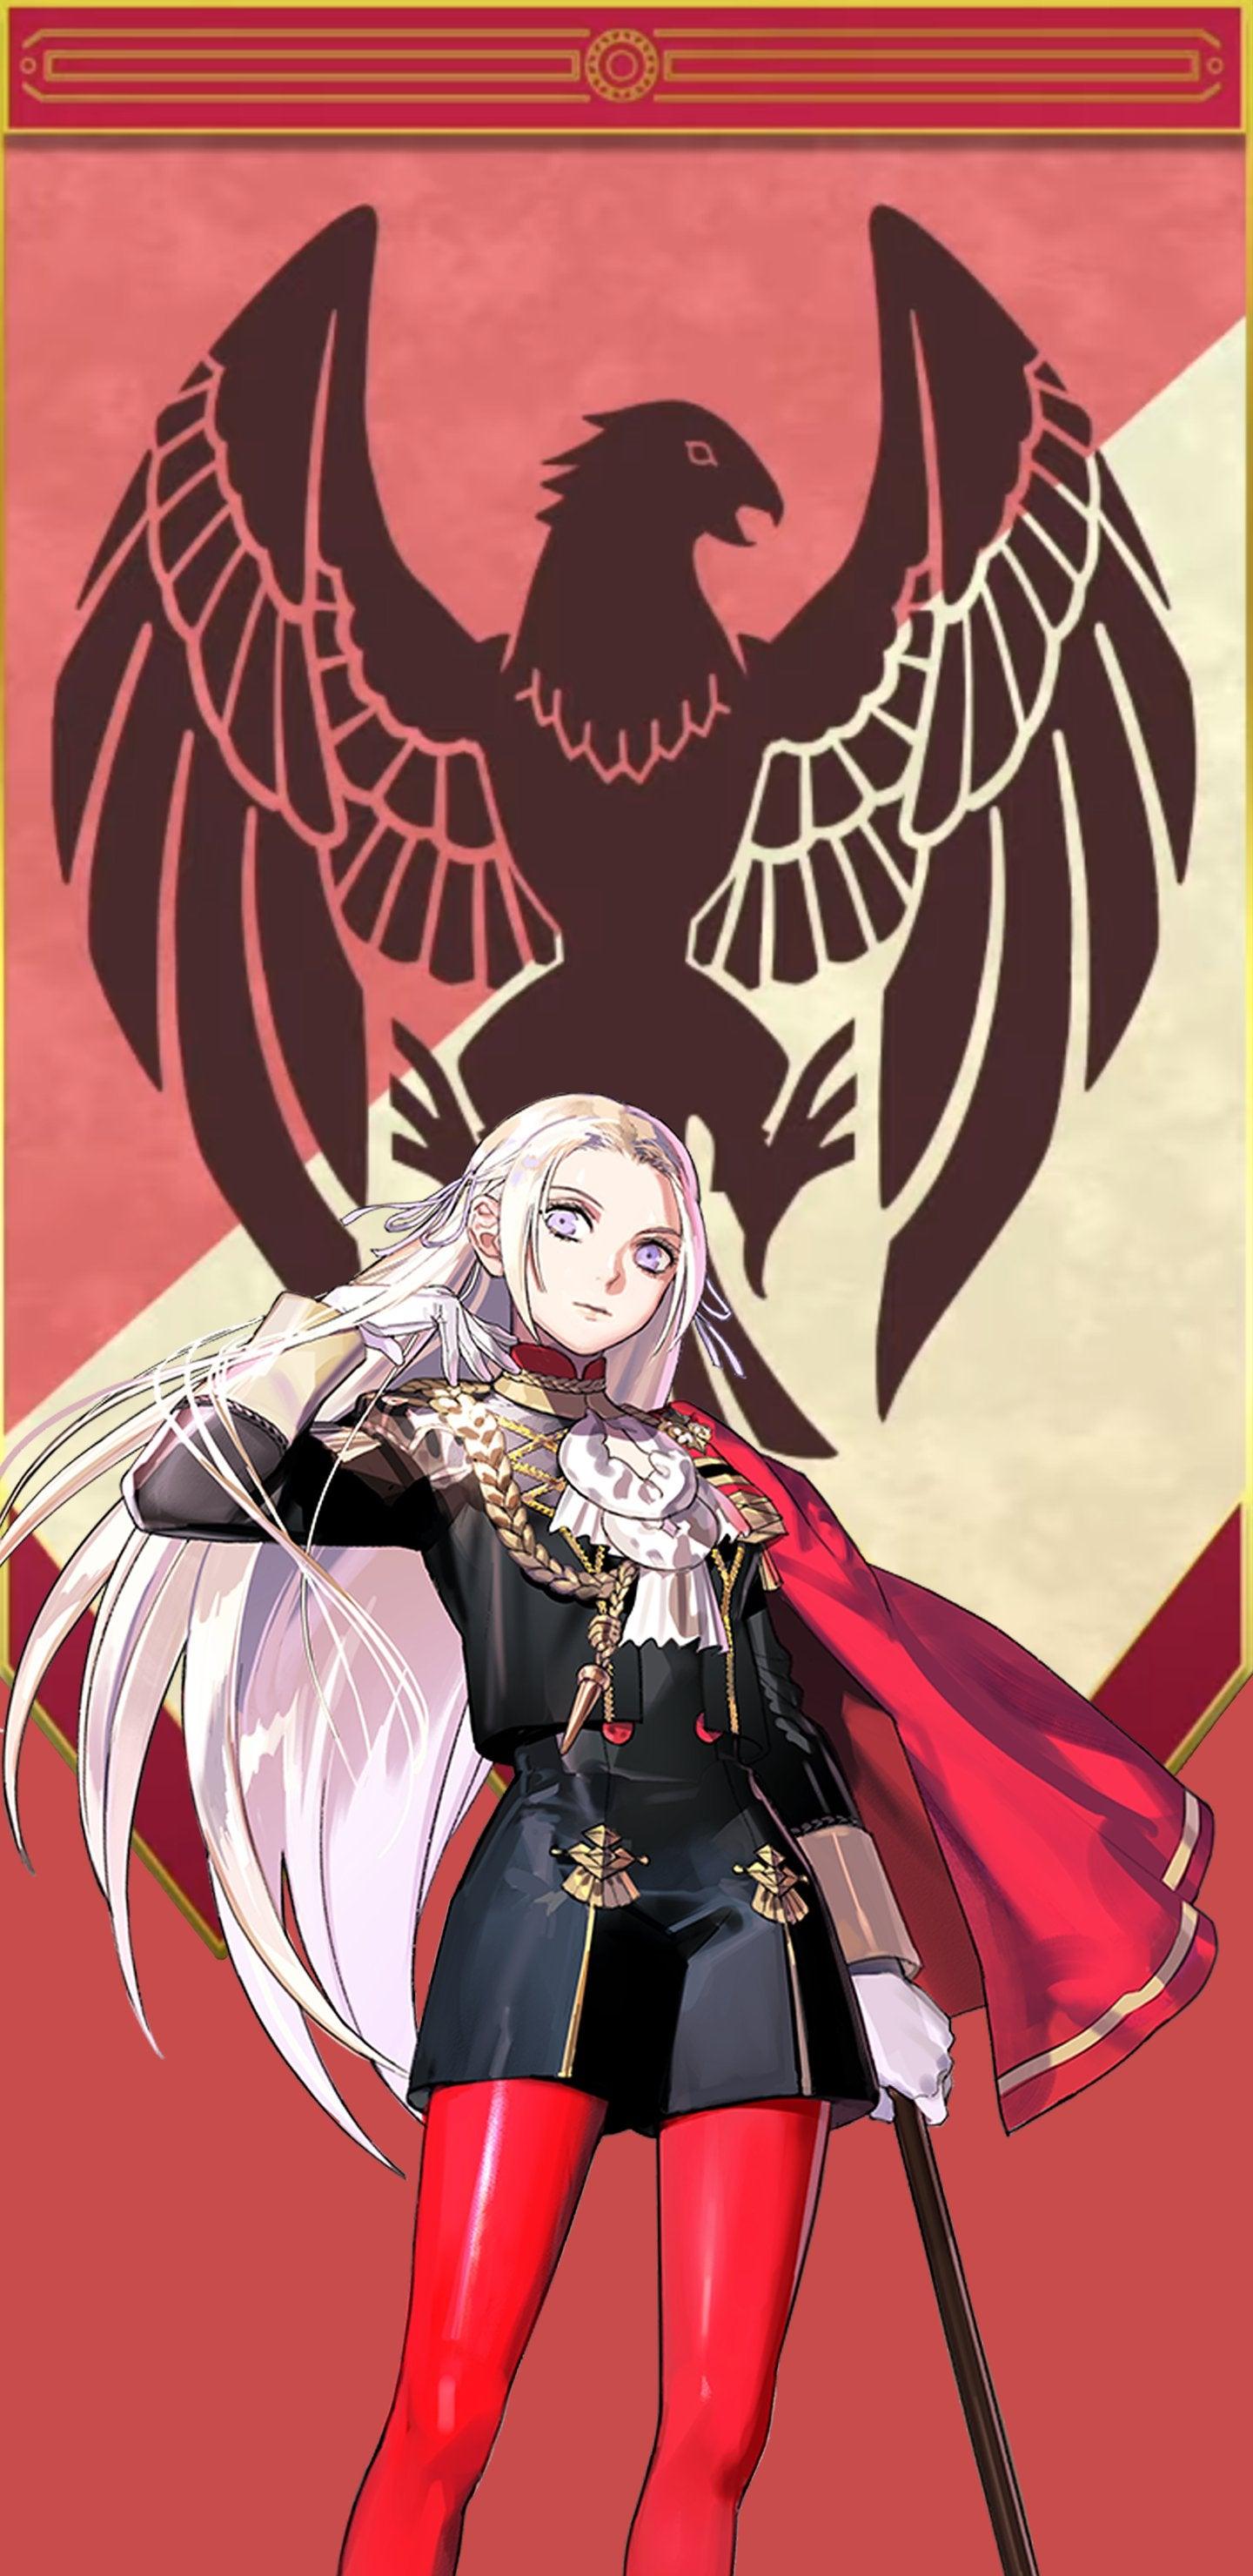 Three Houses Mobile Wallpaper! (inspired By U _Dimi3_'s Earlier This Week)